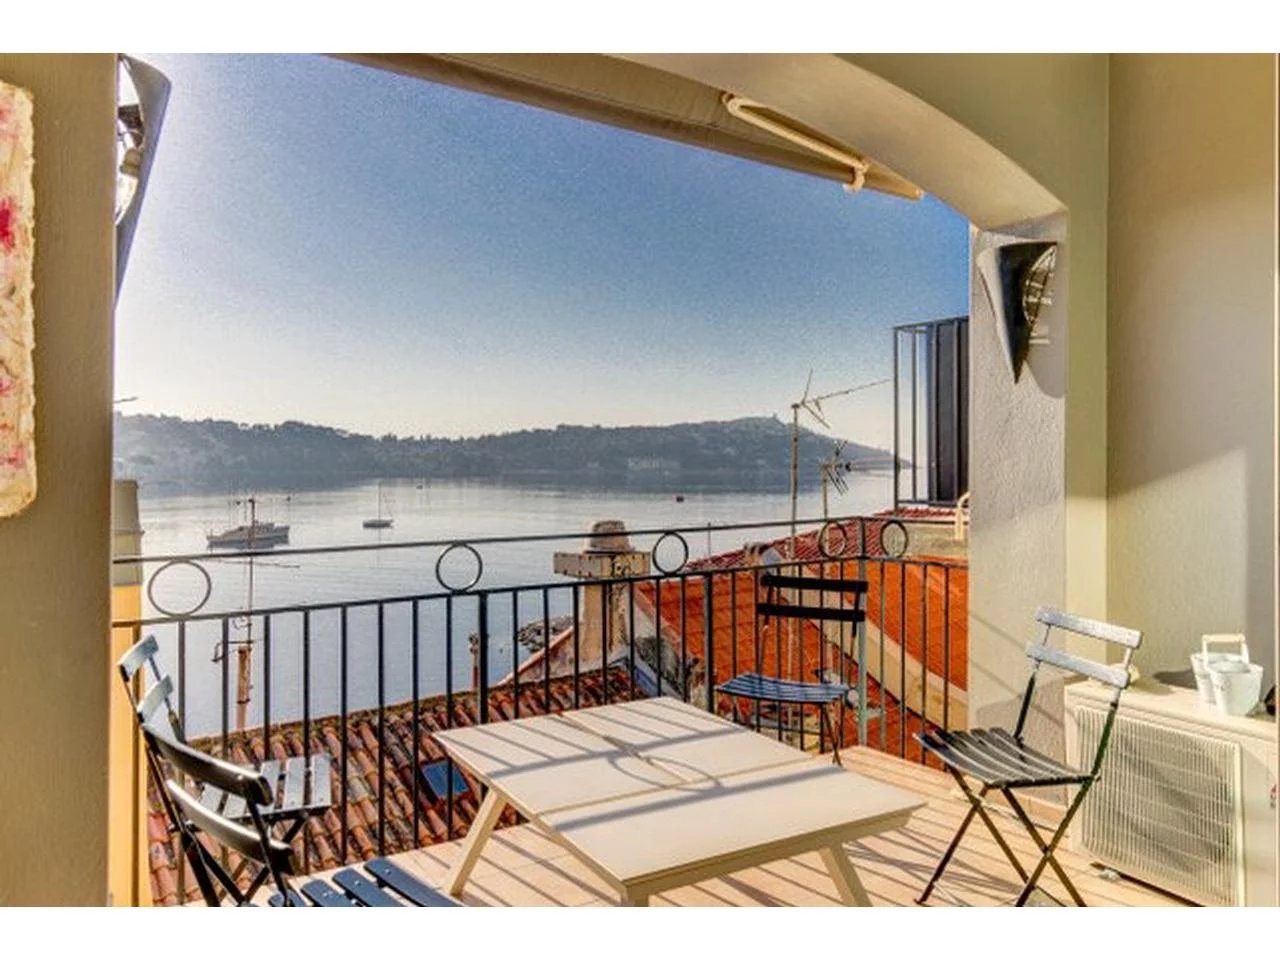 Charming apartment with panoramic views of the bay of Villefranche-sur-mer.